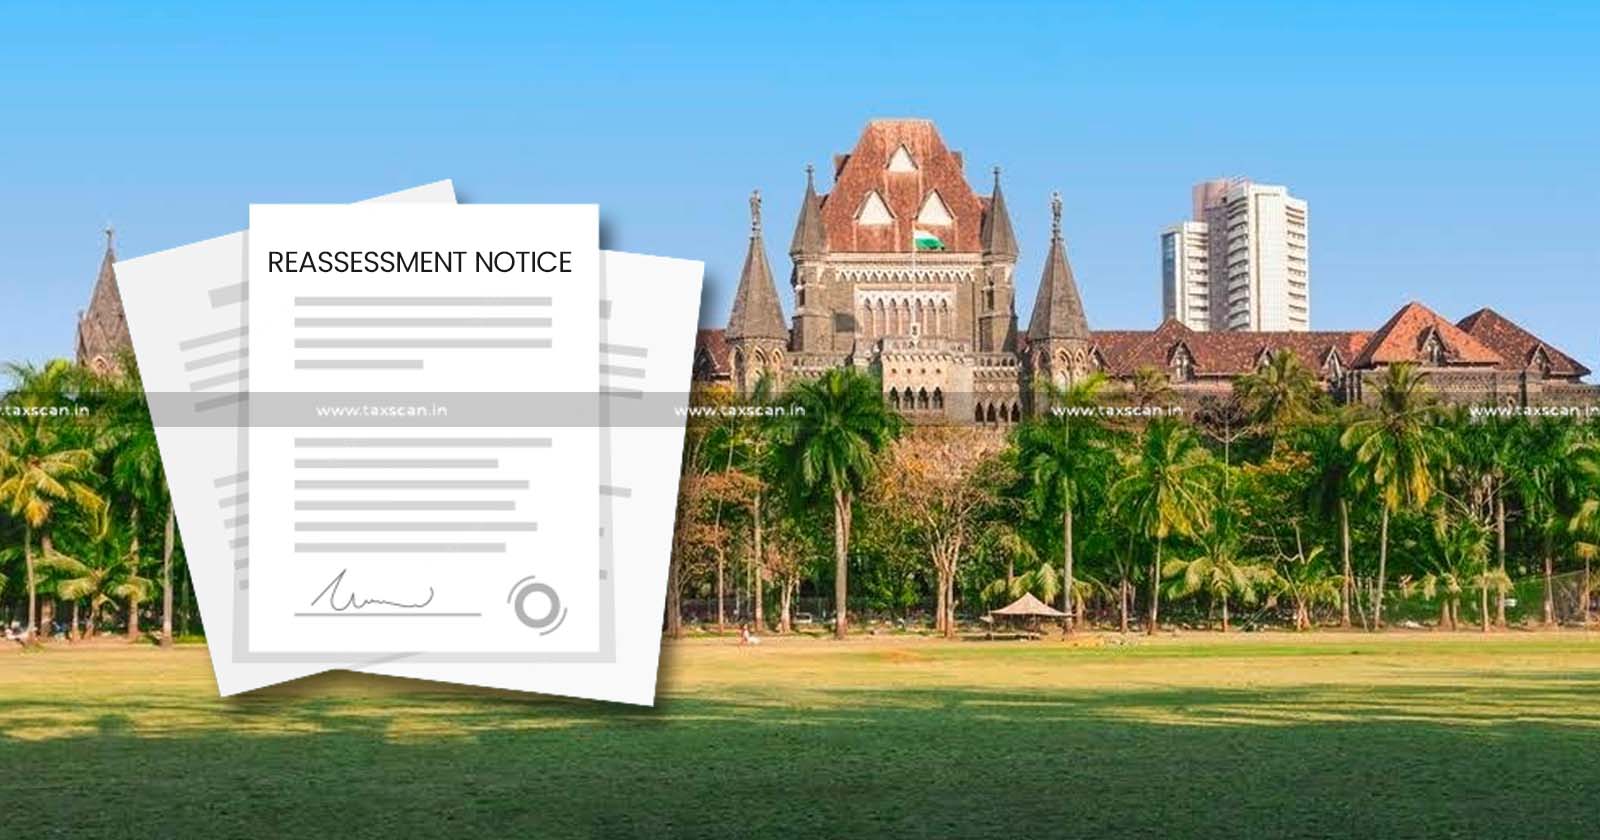 Non-application - Relevant Documents - Bombay High Court - Reassessment Notice - Reassessment - taxscan